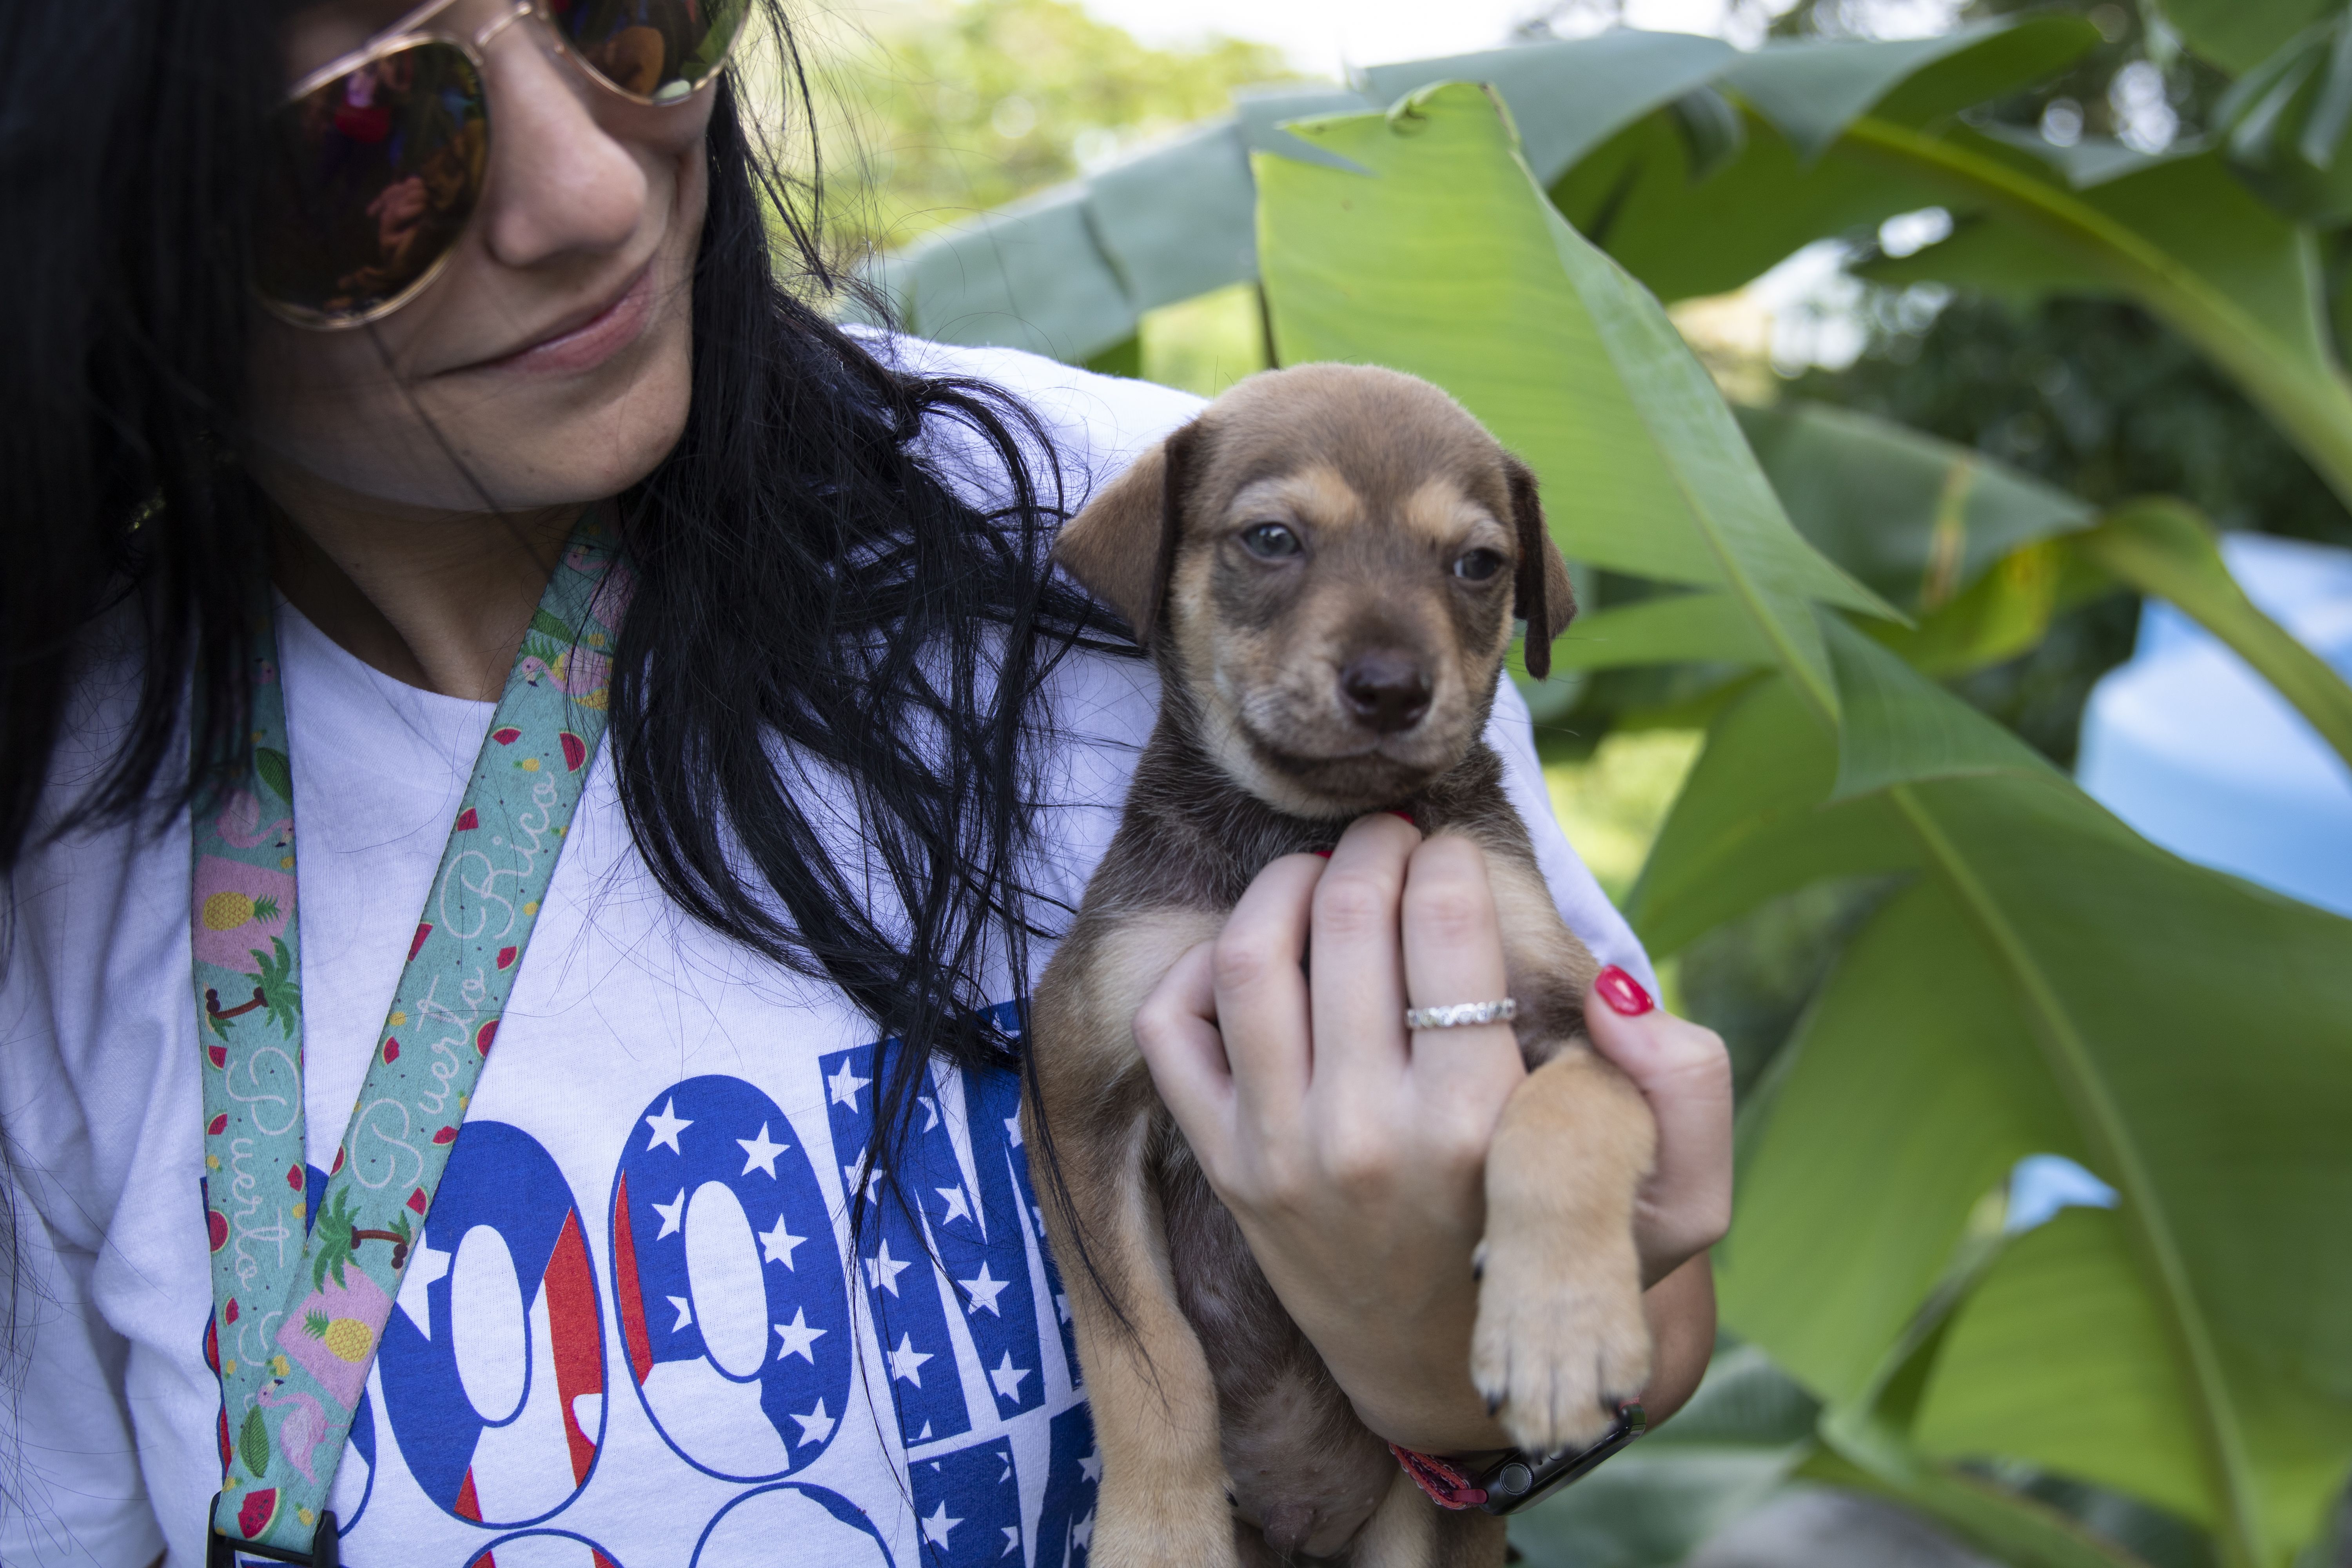 Negrón smiles down as she holds one of the new puppies. Image by Jamie Holt. United States, 2019.